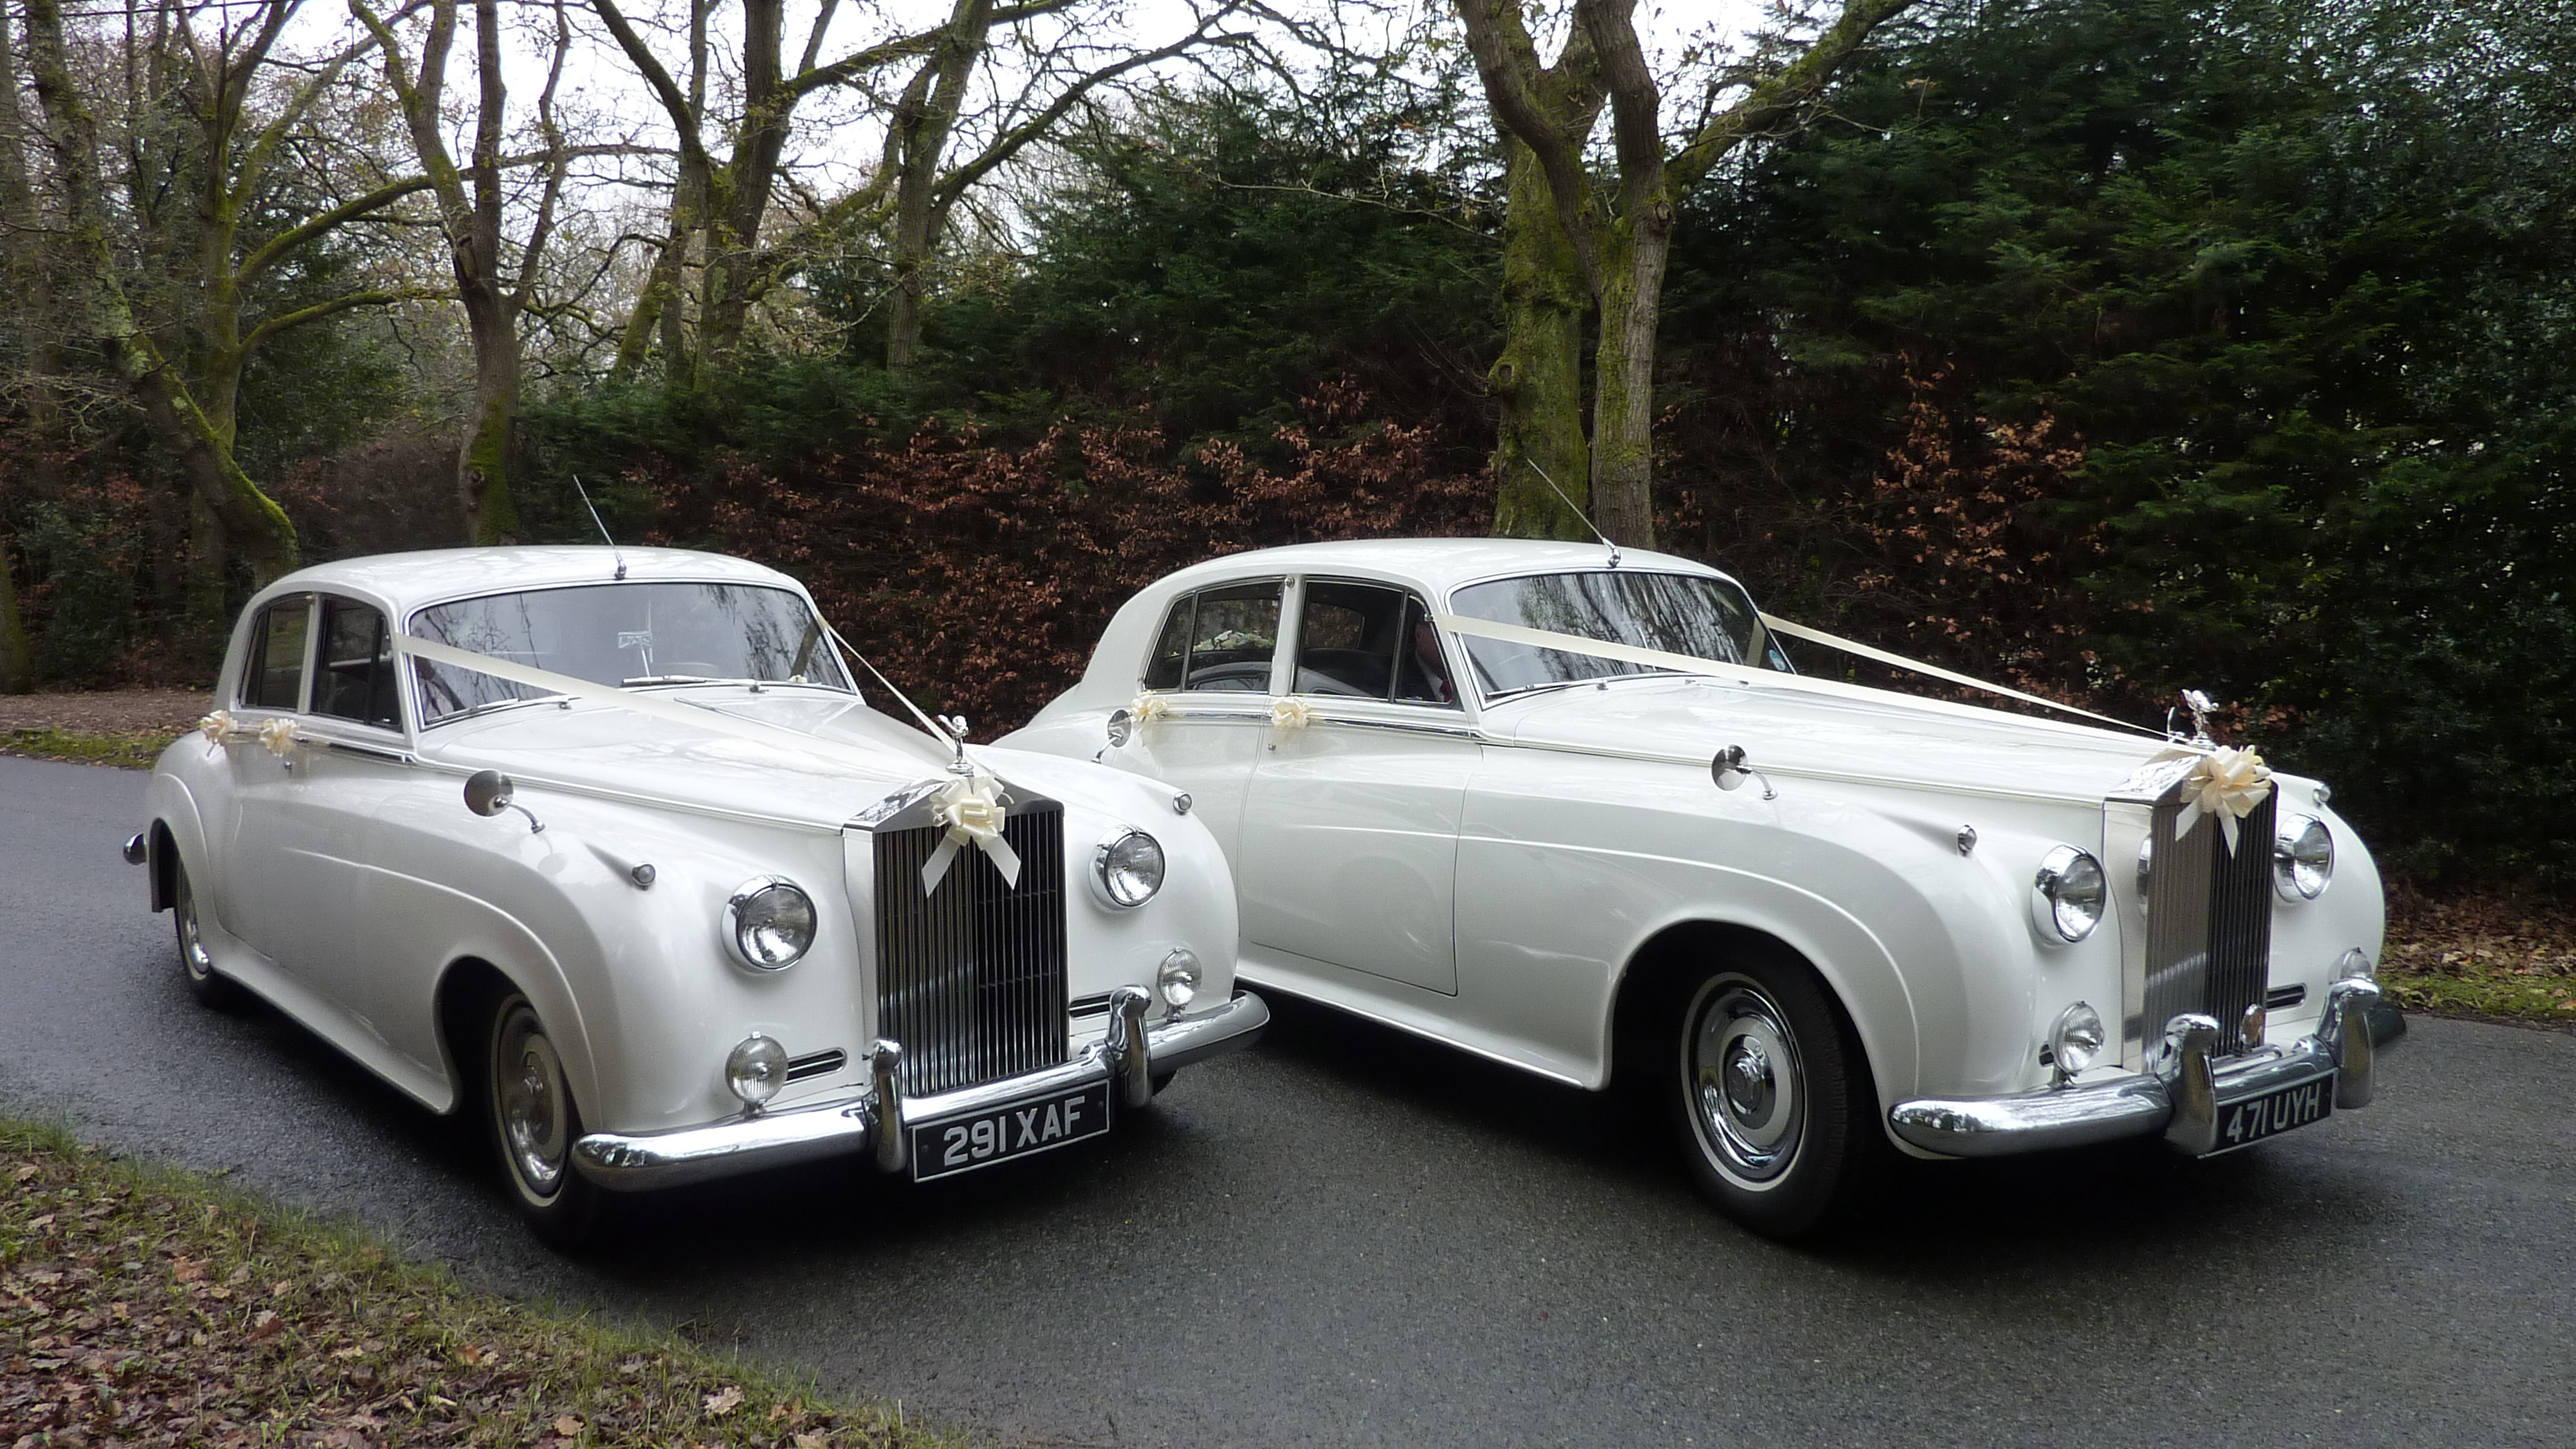 Two classic Rolls-Royce Silver Clouds decorated with traditional V-Shape Ivory Ribbons. Both vehicles are parked side-by-side in a winter Dorset countryside background.